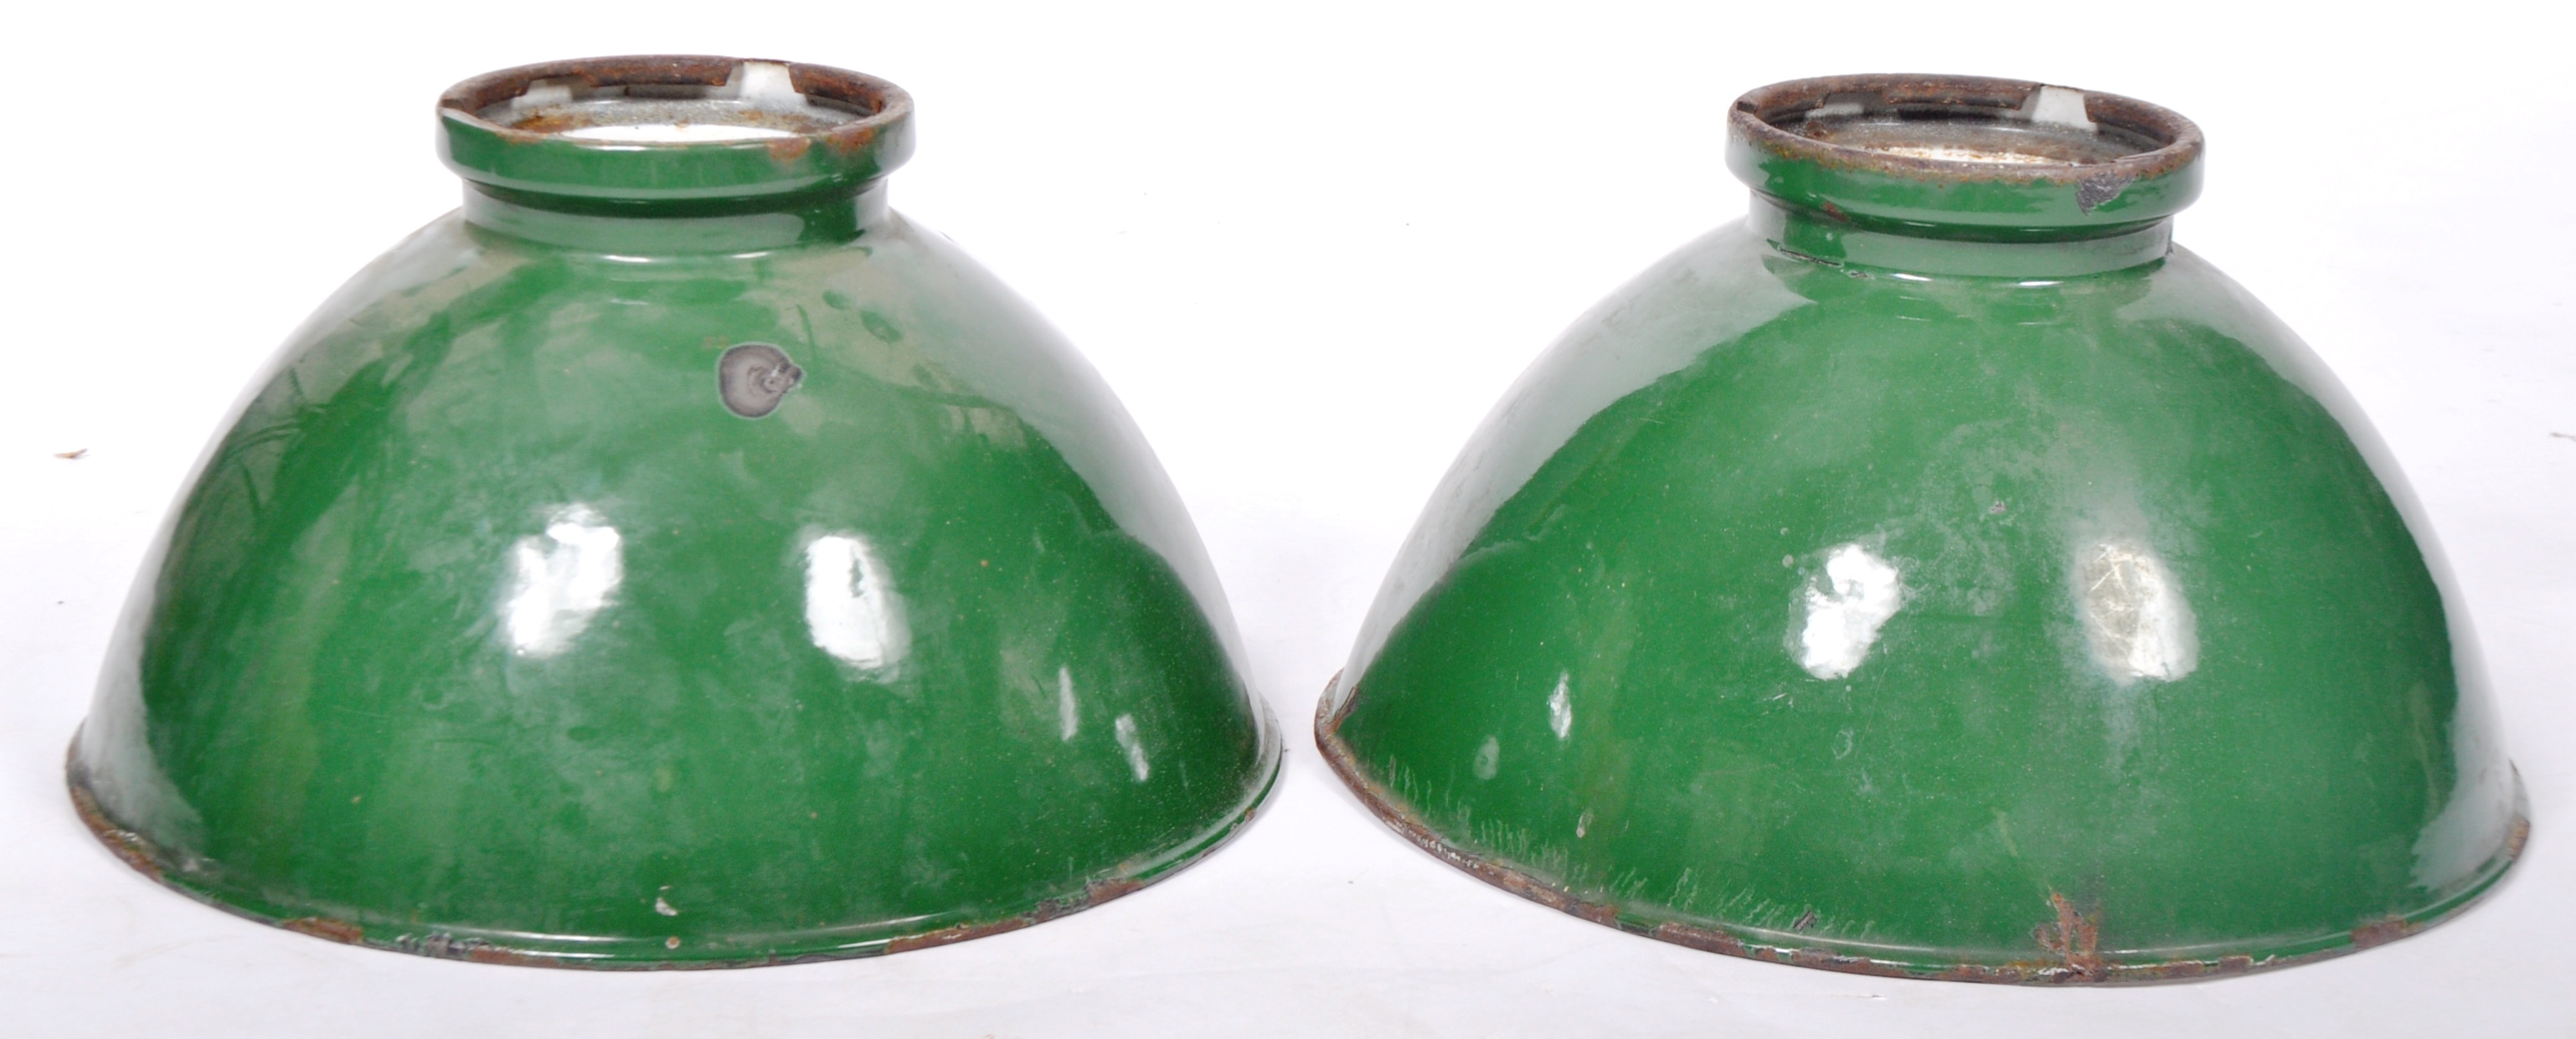 PAIR OF RETRO VINTAGE 1930'S FACTORY GREEN PENDANT SHADES